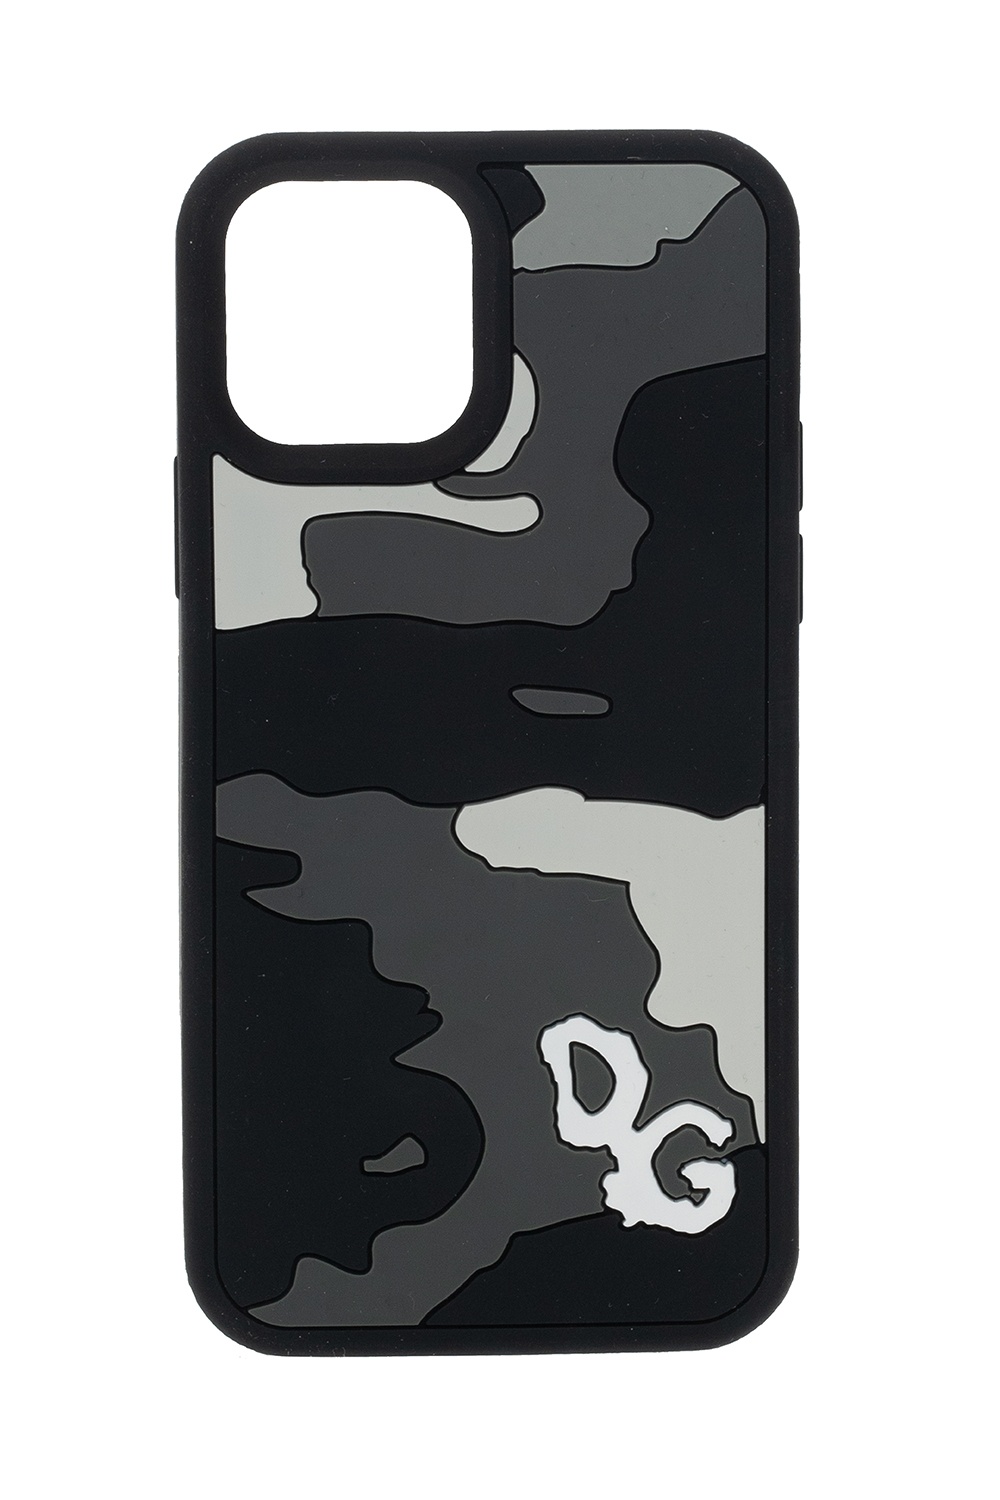 Top 36+ imagen dolce and gabbana phone case iphone 12 pro max